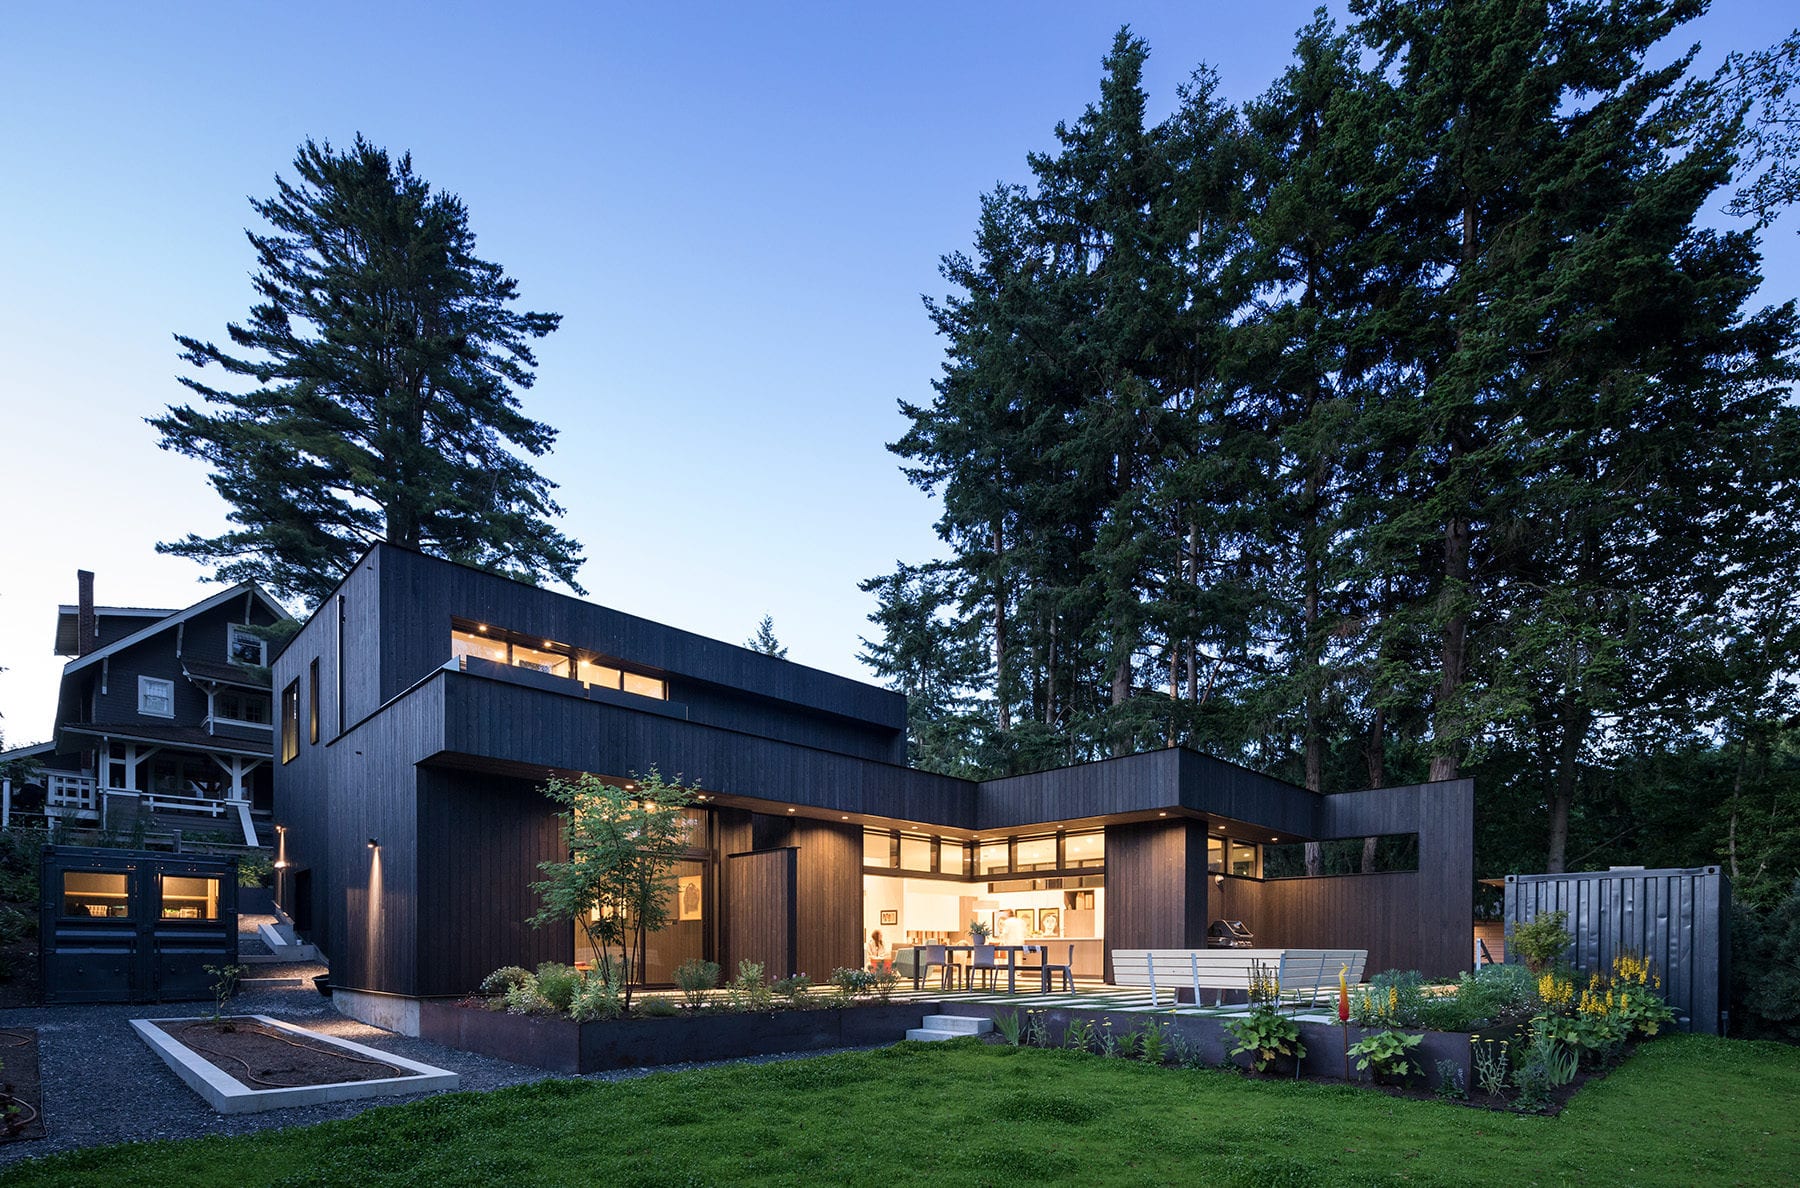 Open Indoor and Outdoor Living Space, Combo House in Vancouver, BC - Fast + Epp; Photo by Measured Architecture